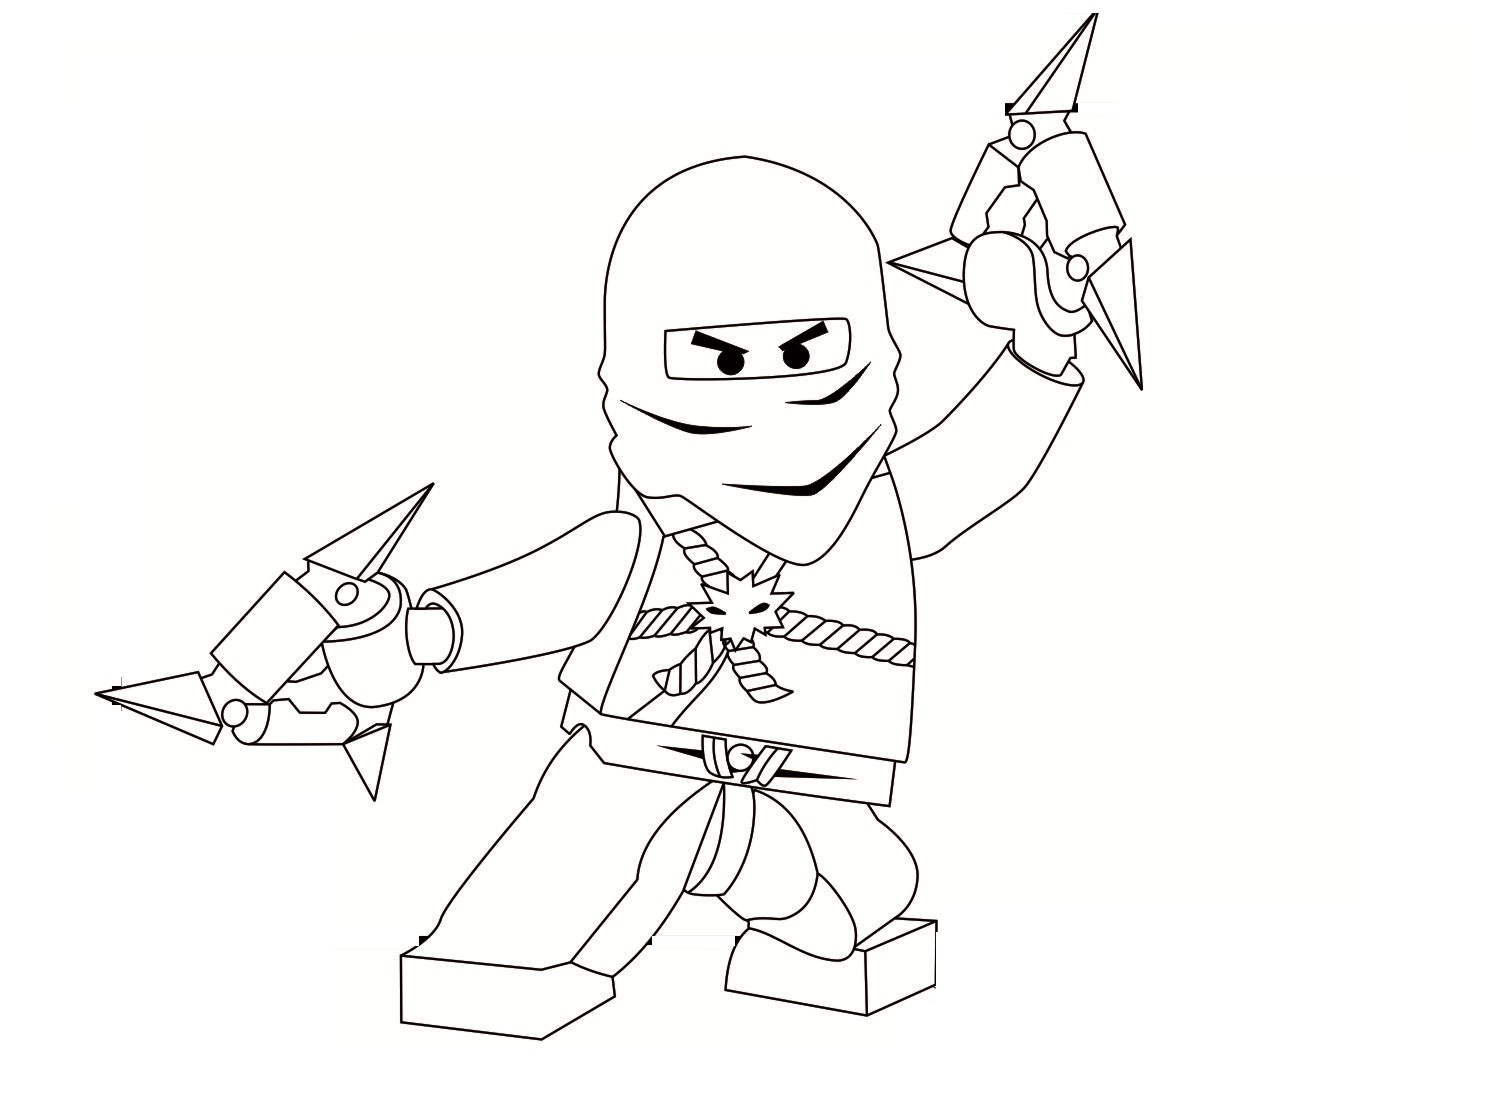 Free Printable Ninjago Coloring Pages For Kids Coloring Wallpapers Download Free Images Wallpaper [coloring436.blogspot.com]